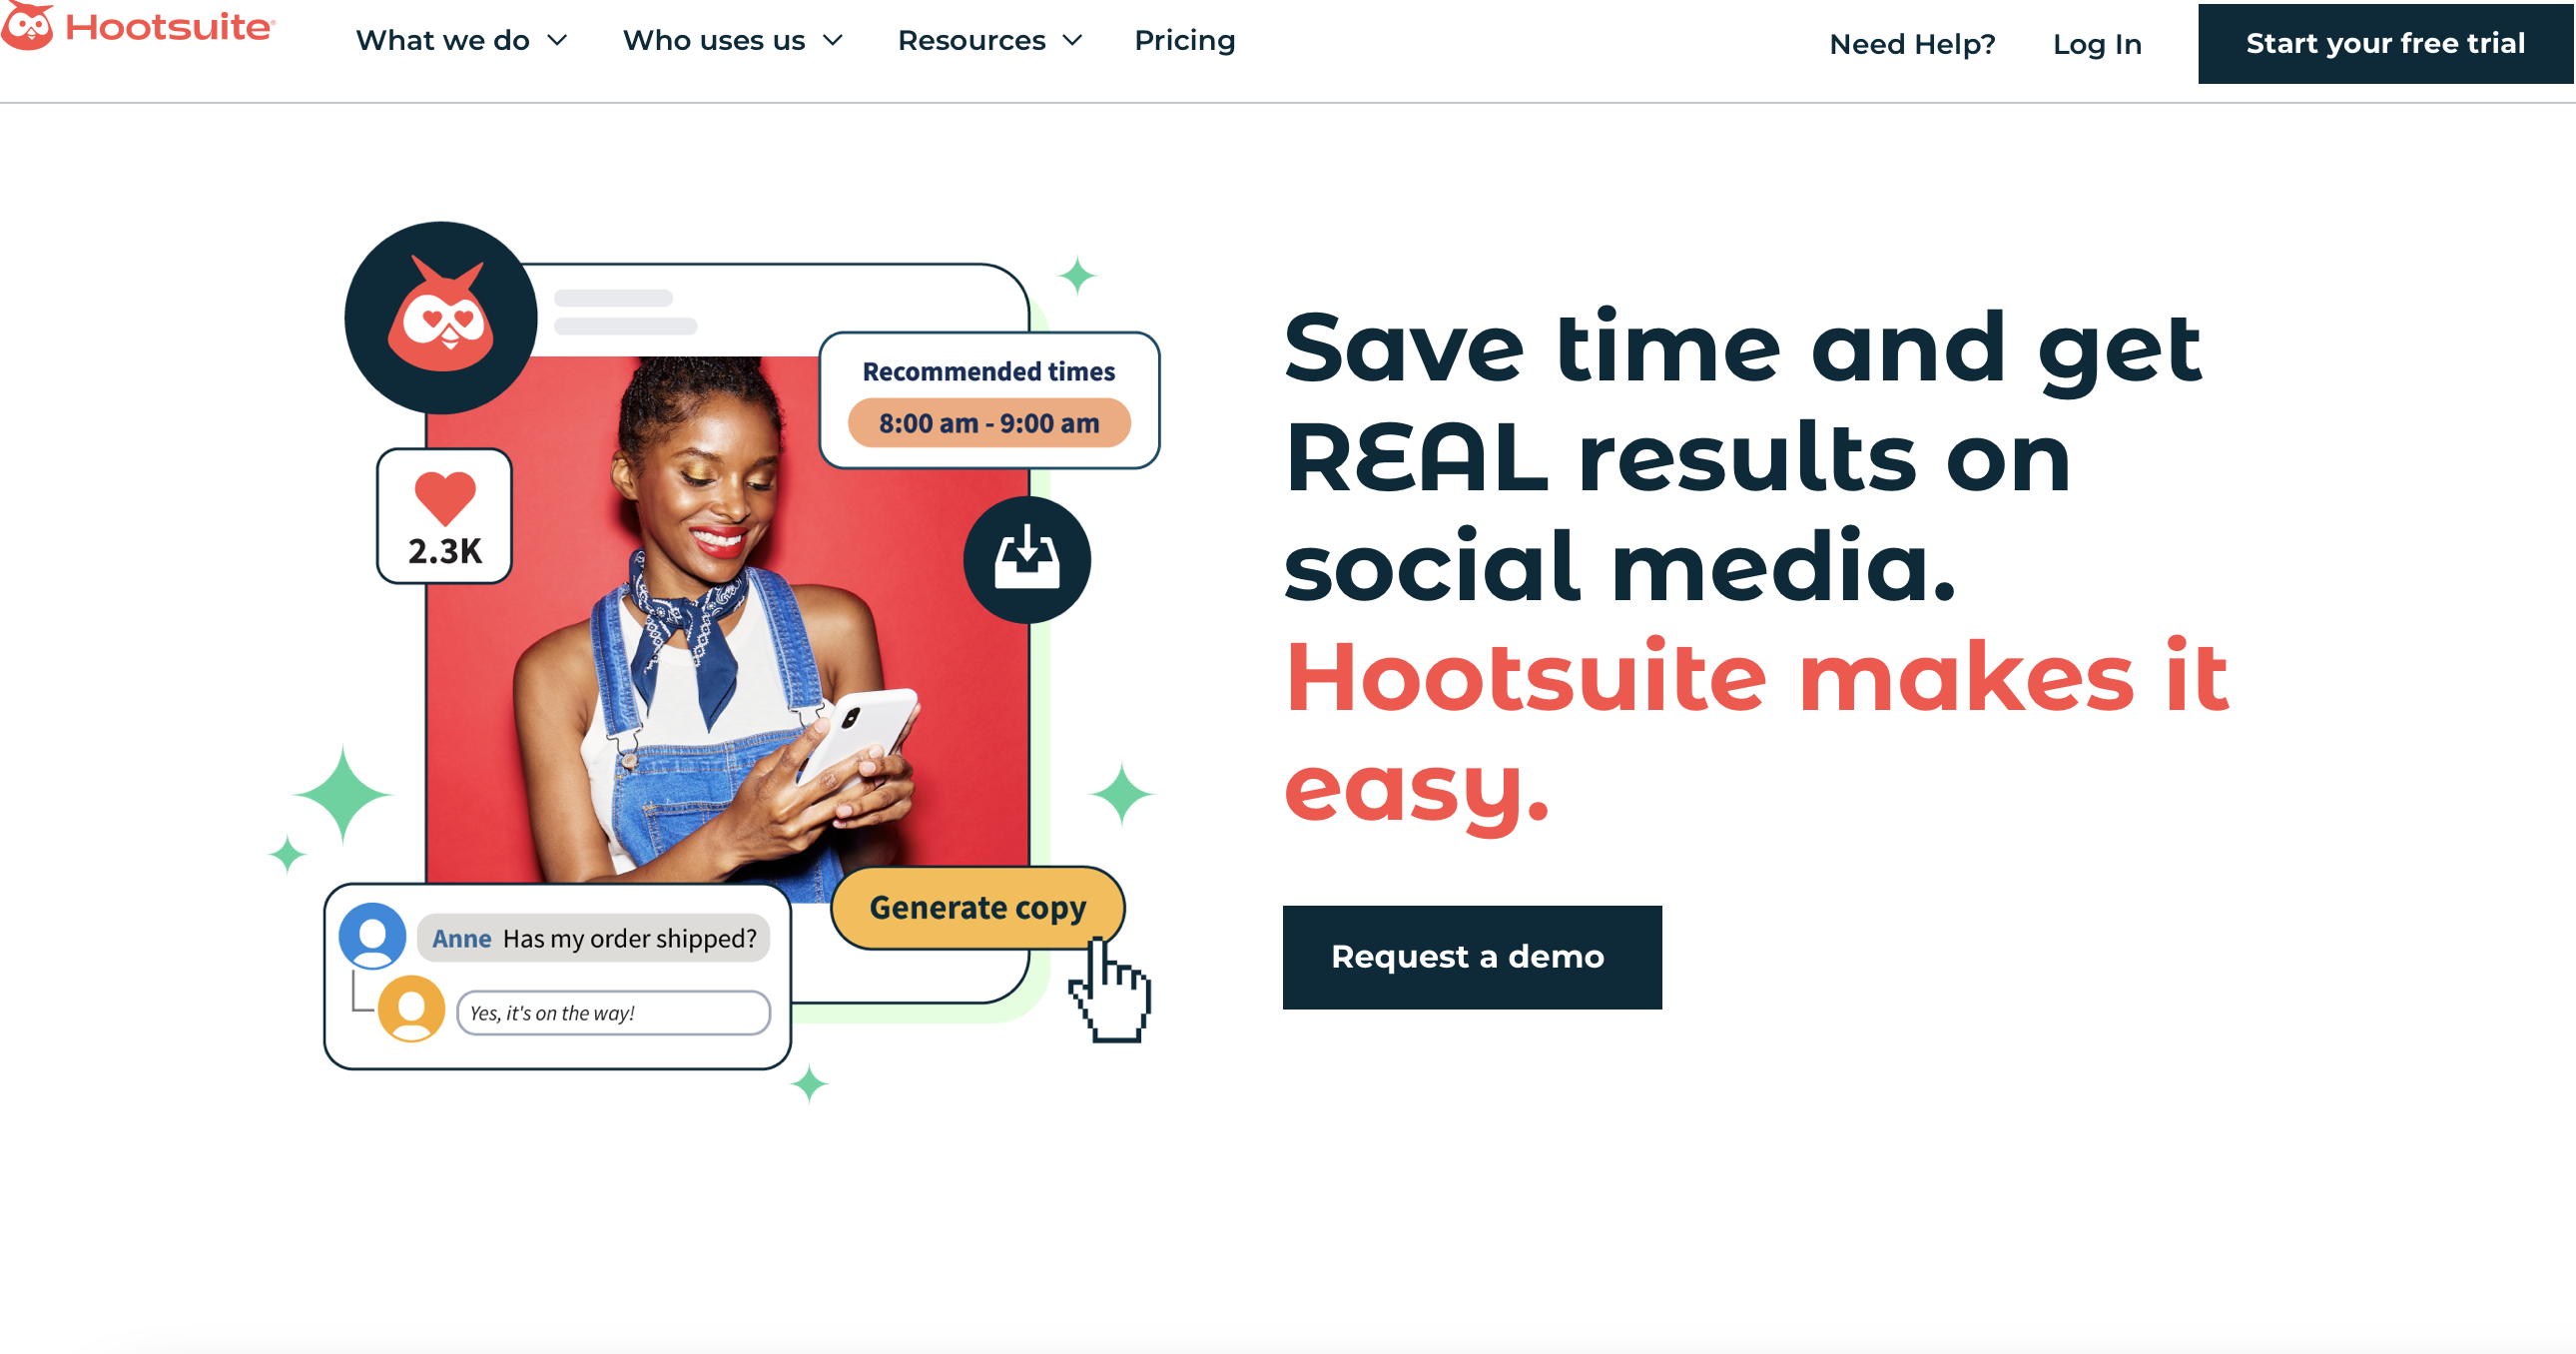 hootsuite homepage showing a smiling woman surrounded by graphic representations of metrics and features next to text that reads "save time and get REAL results on social media. Hootsuite makes it easy."